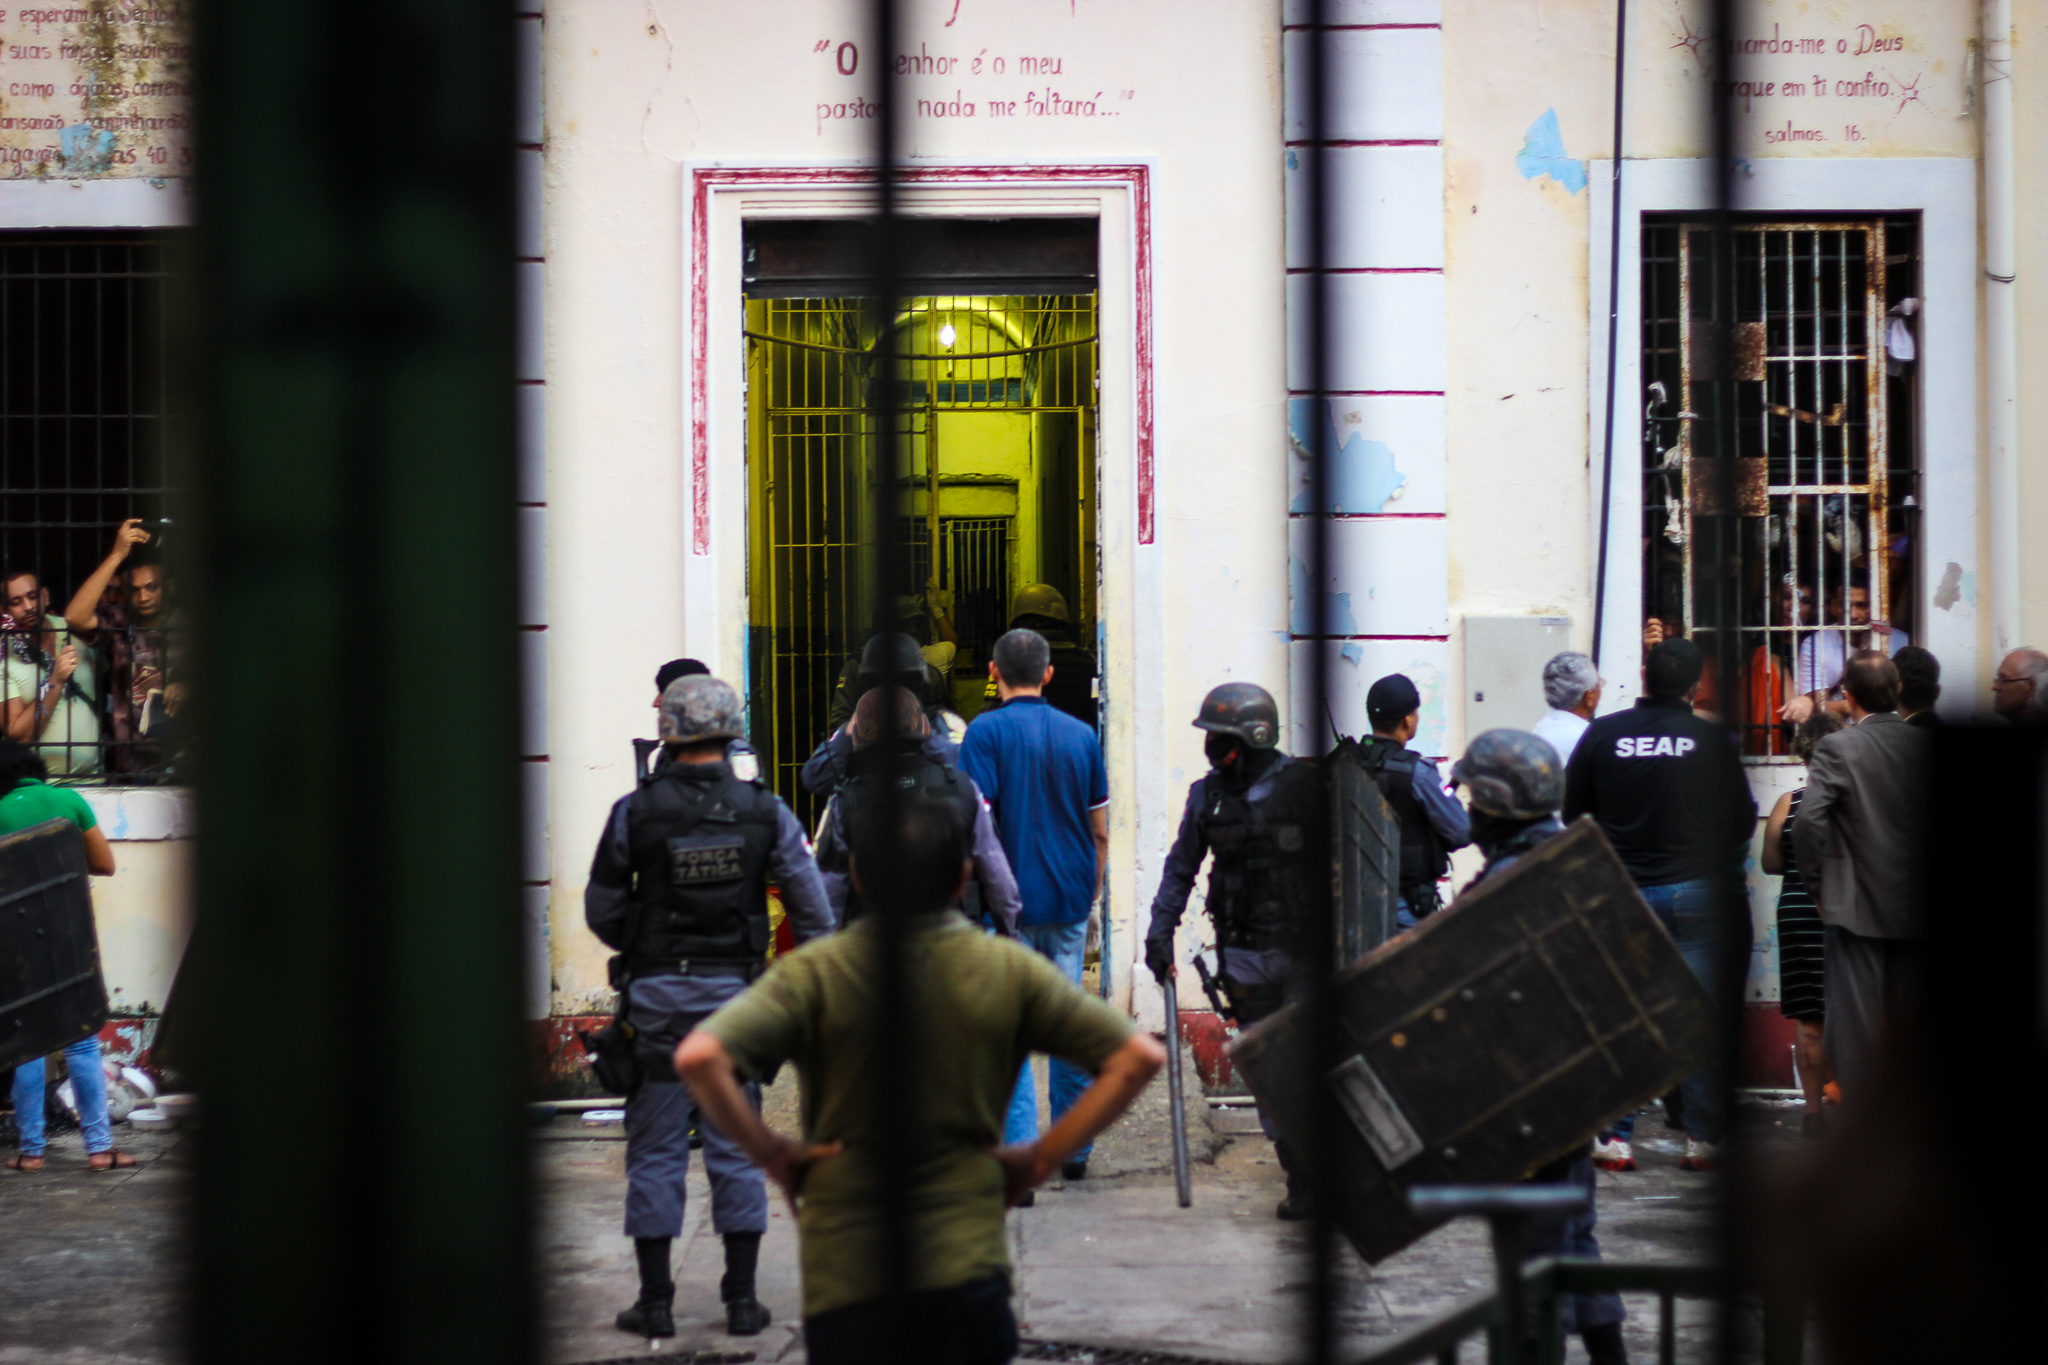 Inspection carried out by Conectas, Justica Global and Pastoral Carceraria at the CNBB in the Anisio Jobim Penitentiary Complex (Compaj), in Manaus (Amazonia), a few days after an uprising that left 5 dead and led to a crisis of violence in prisons across other Brazilian states.